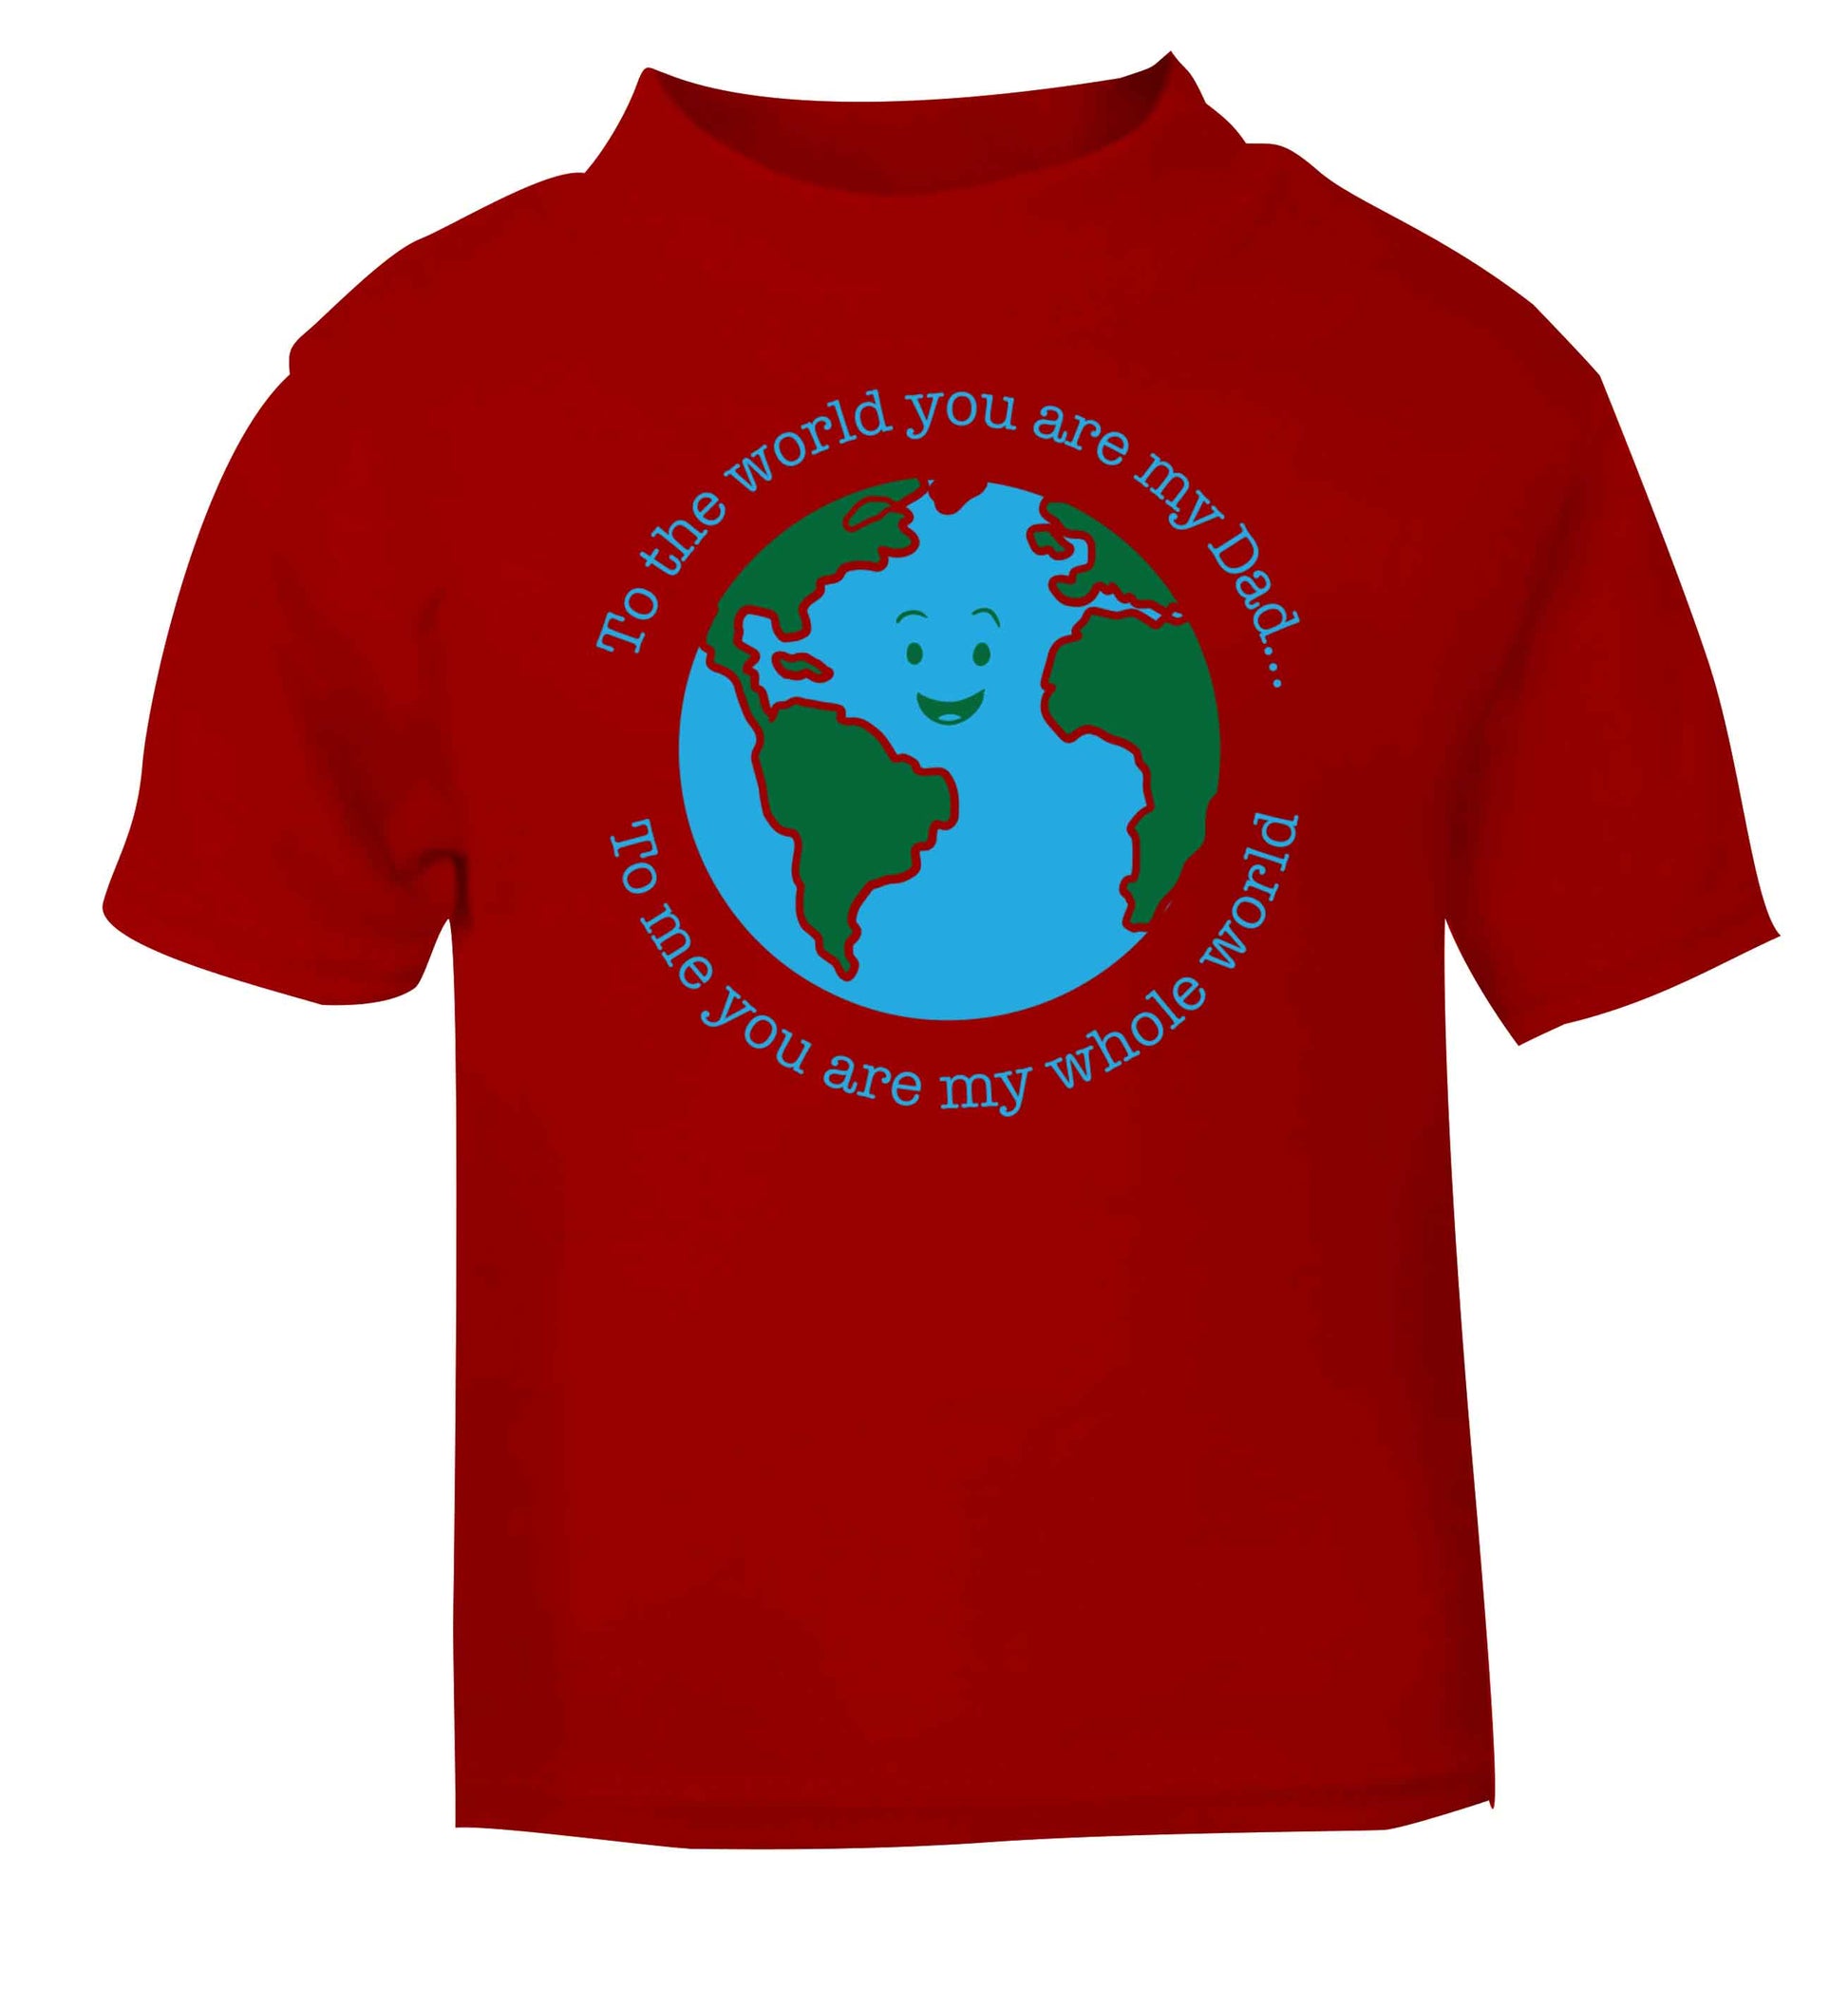 To the world you are my dad, to me you are my whole world red baby toddler Tshirt 2 Years